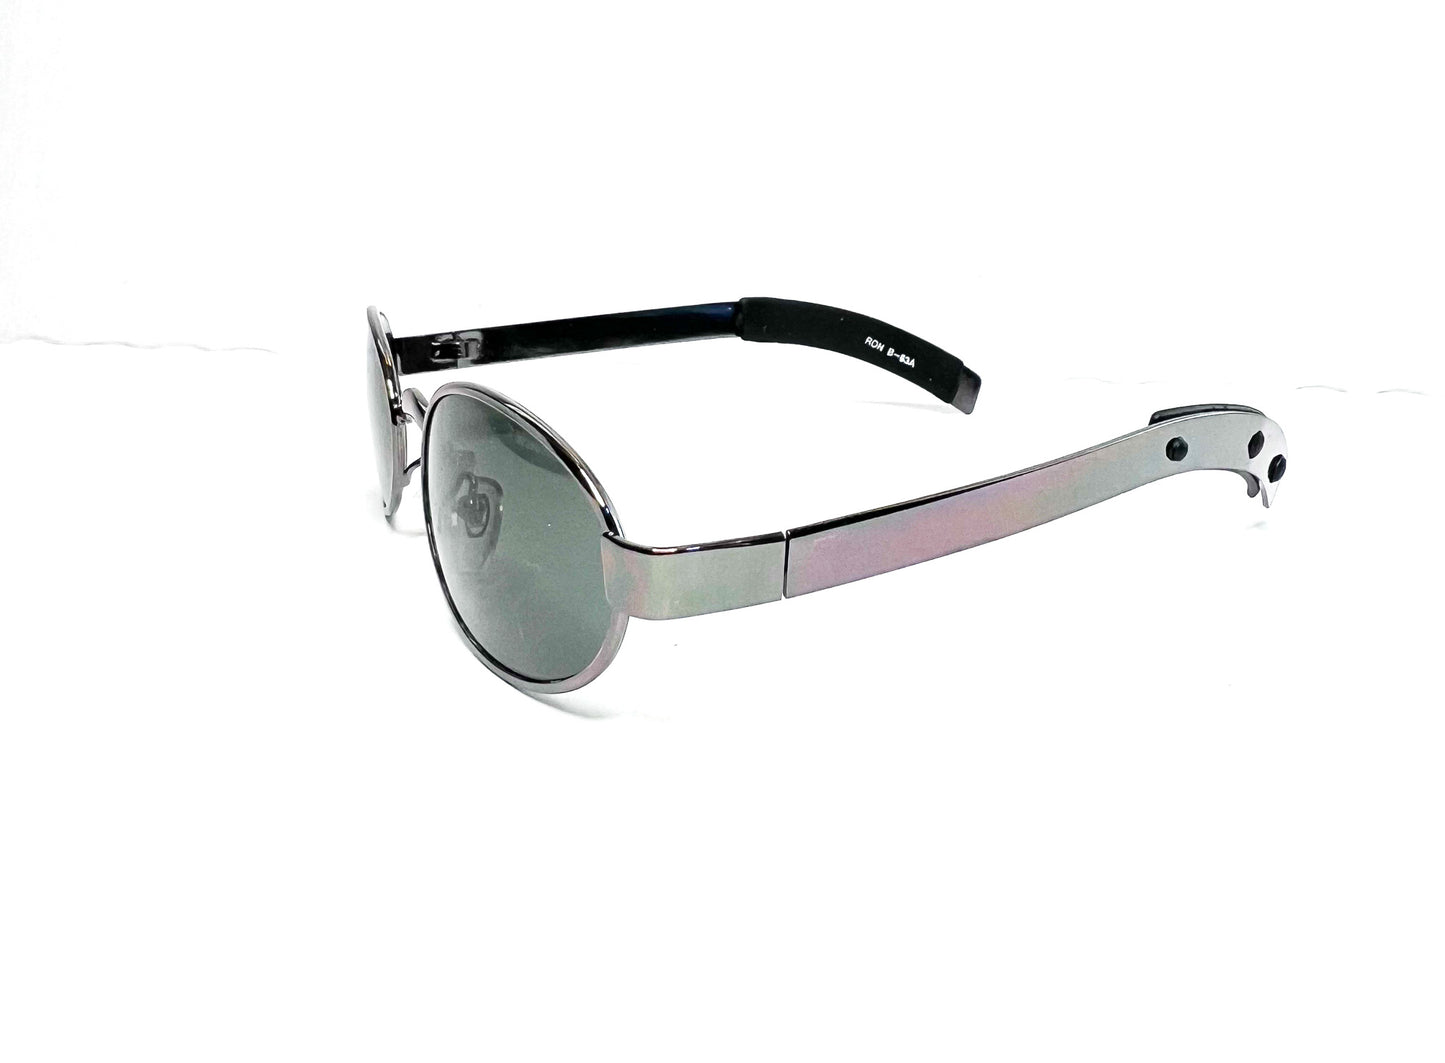 SX Oval 90's retro lenses with silver details sunglasses